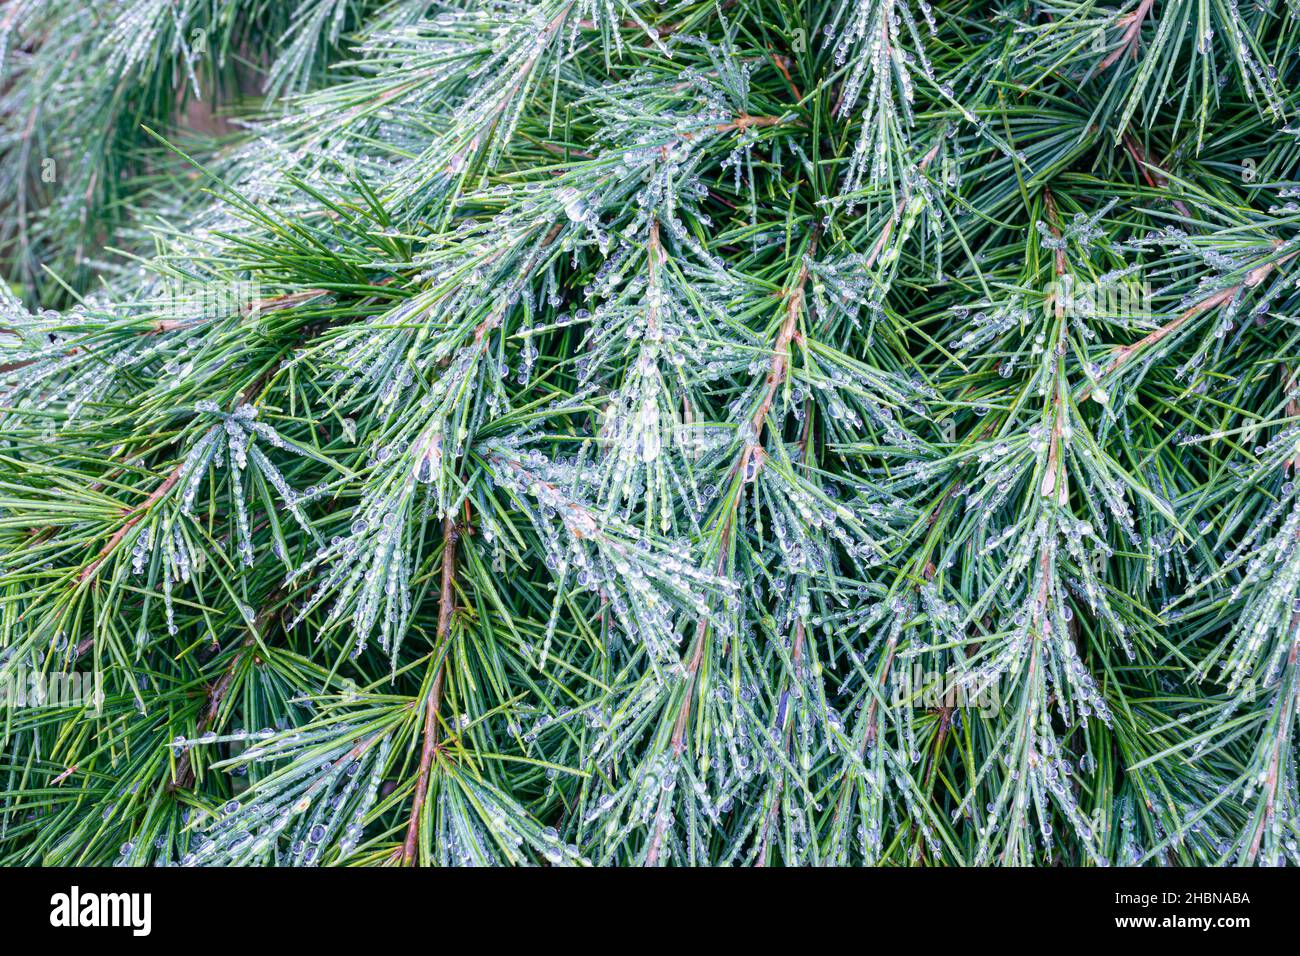 Rain droplets on needles and twigs of a cedar tree, giving it a silvery appearance Stock Photo